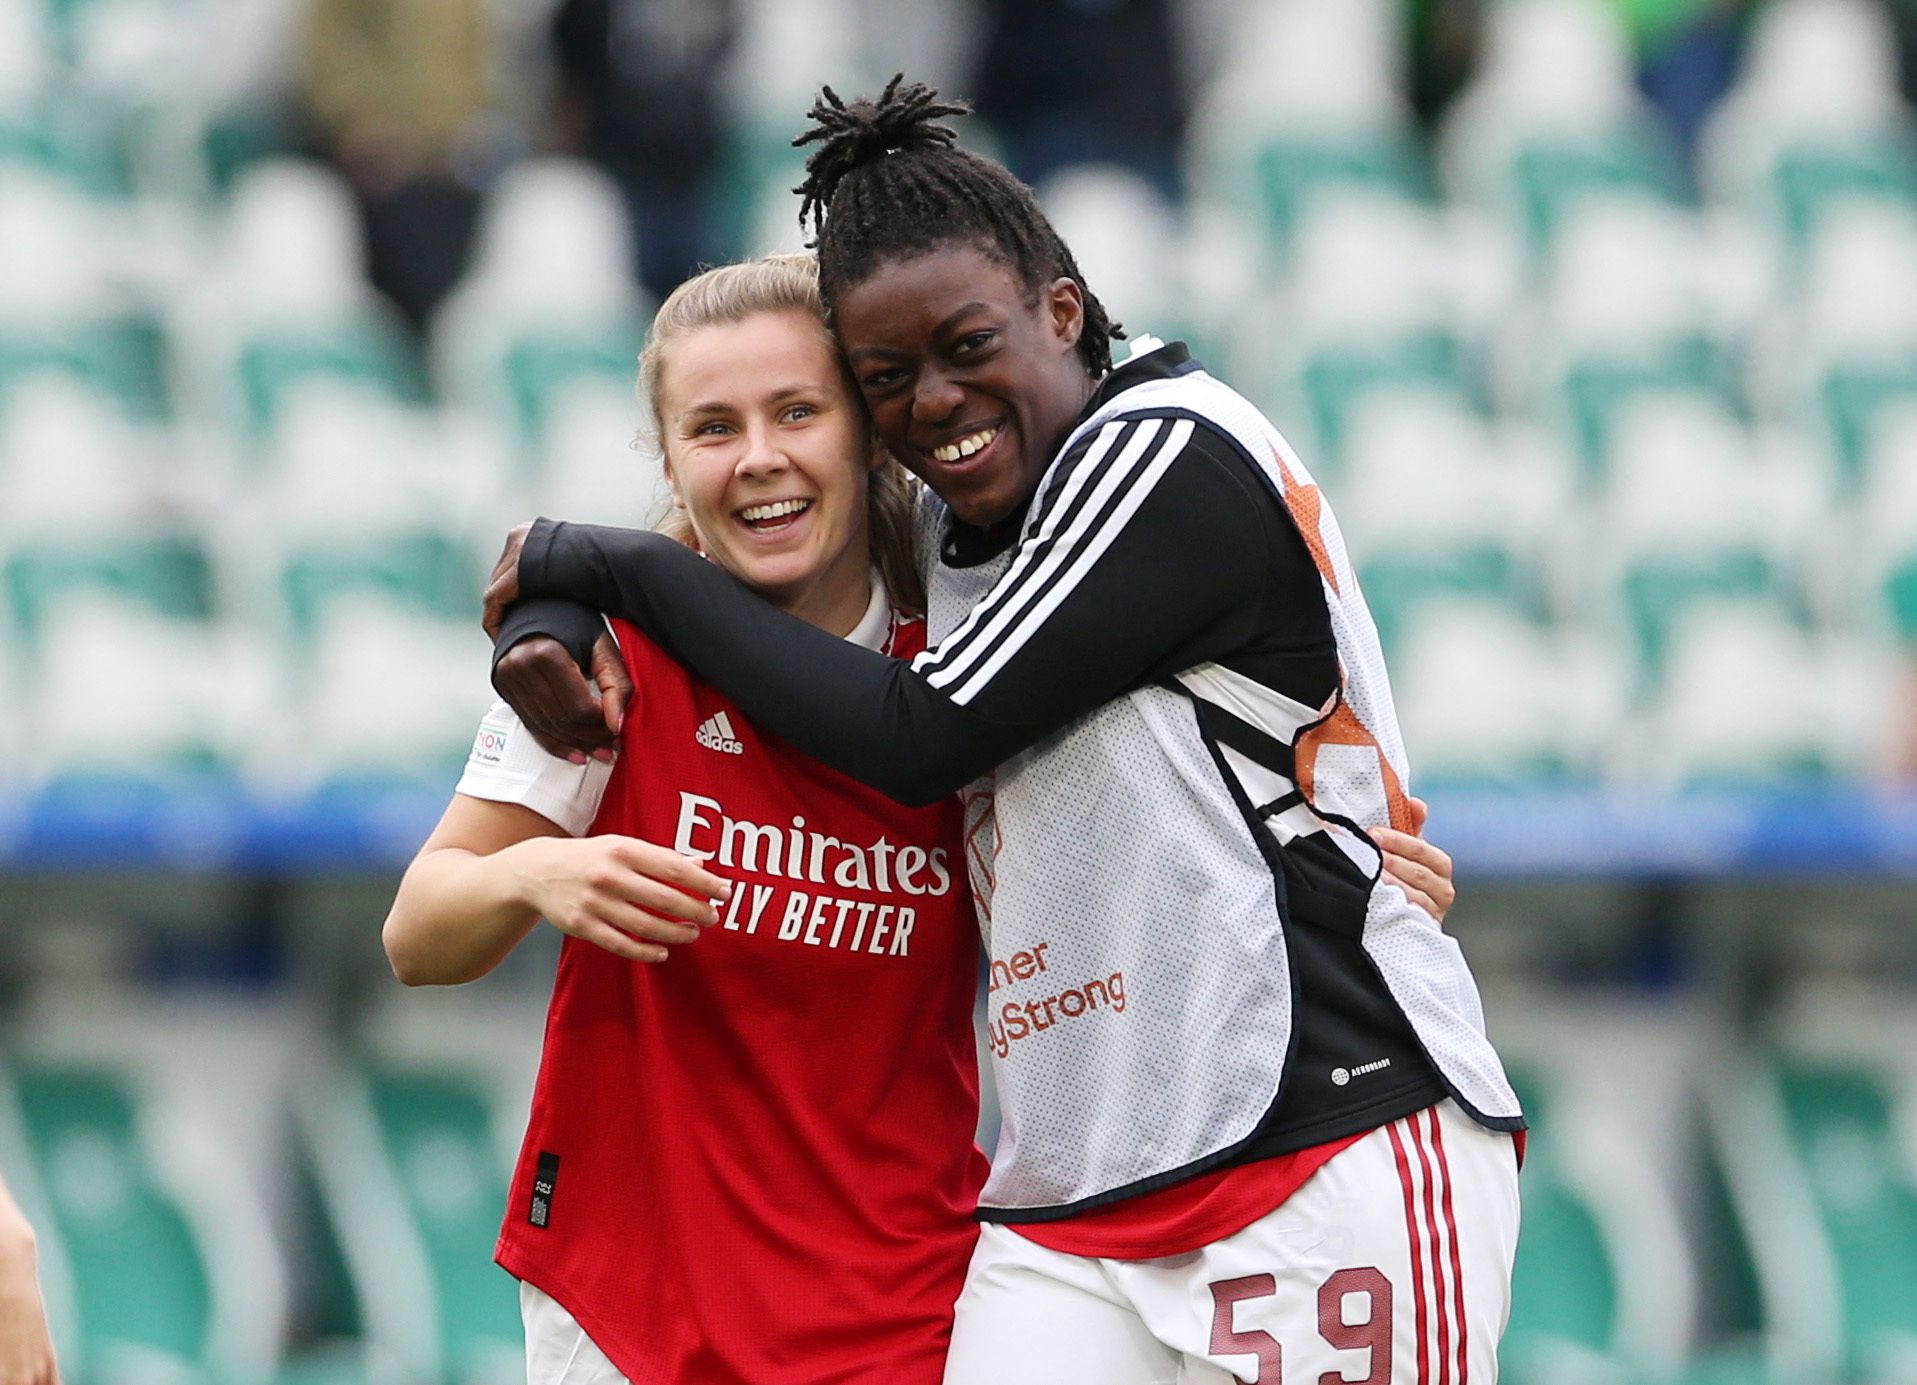 Michelle Agyemang is a young Arsenal superstar to keep your eye on next season